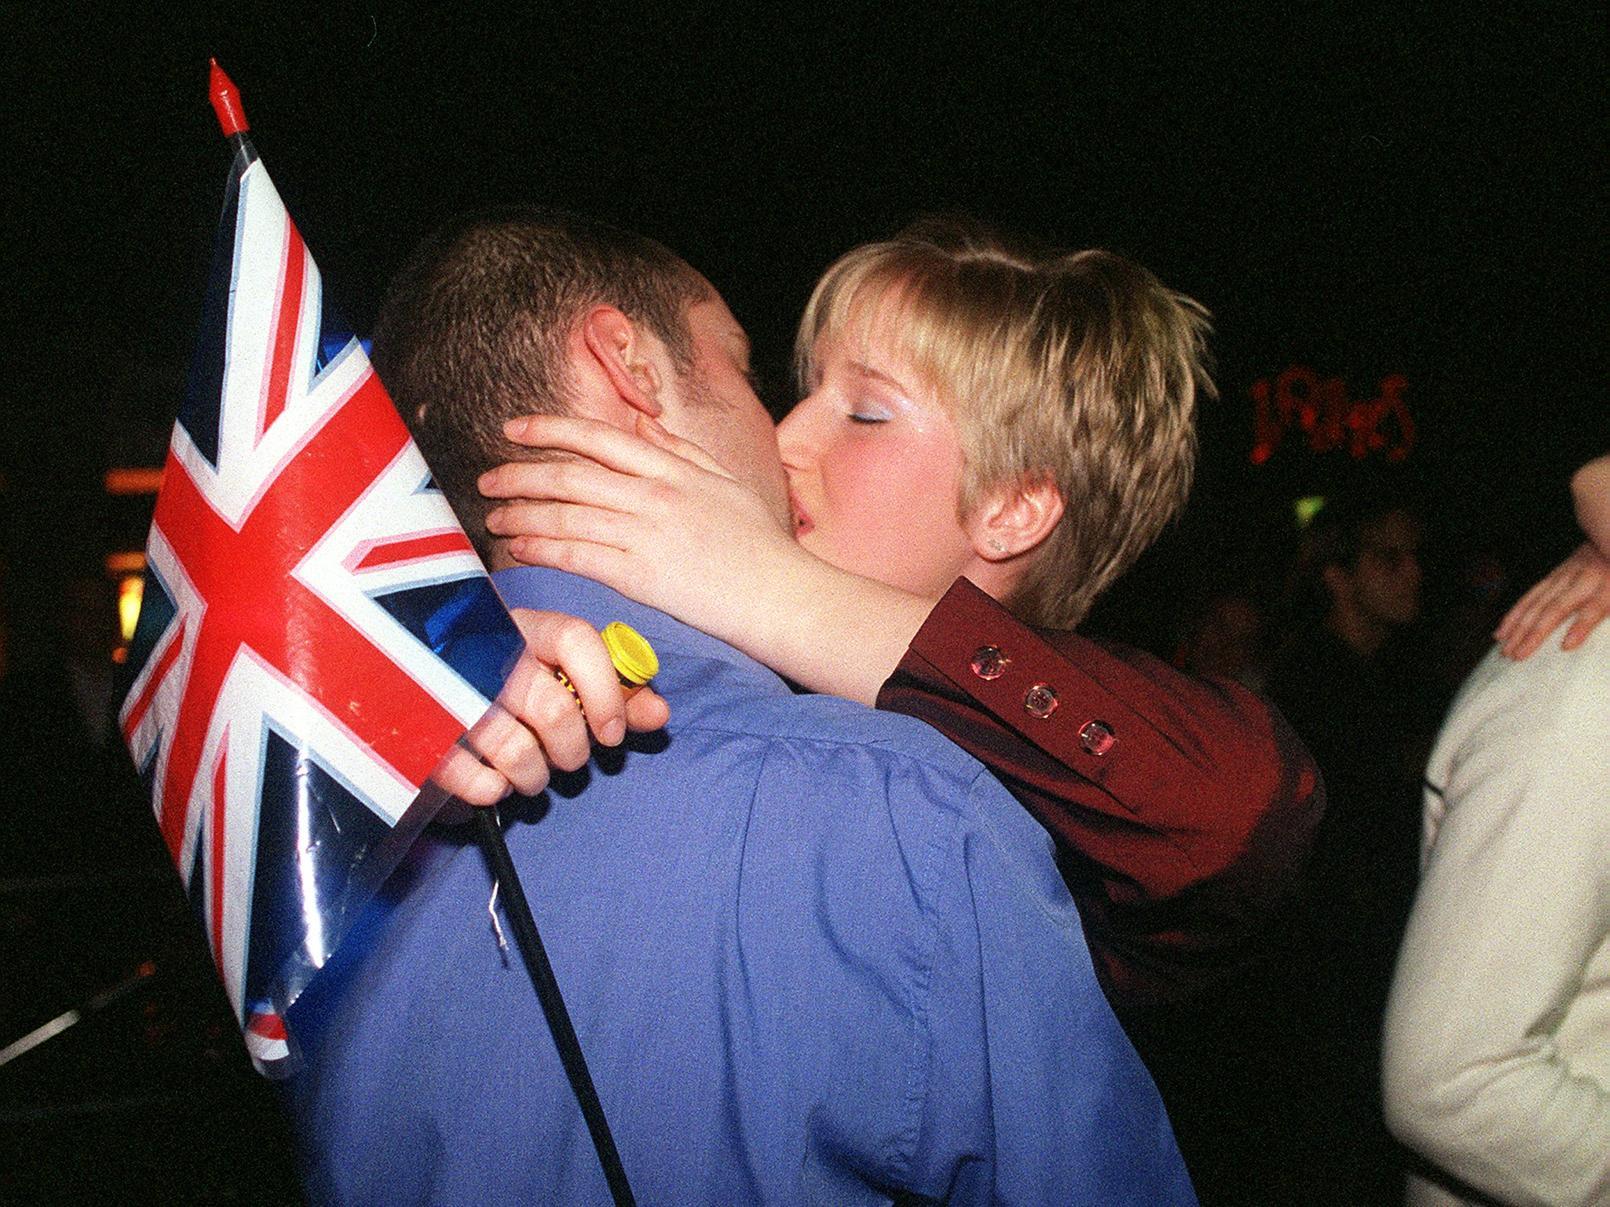 Our snapper captures a New Year kiss on the dancefloor.